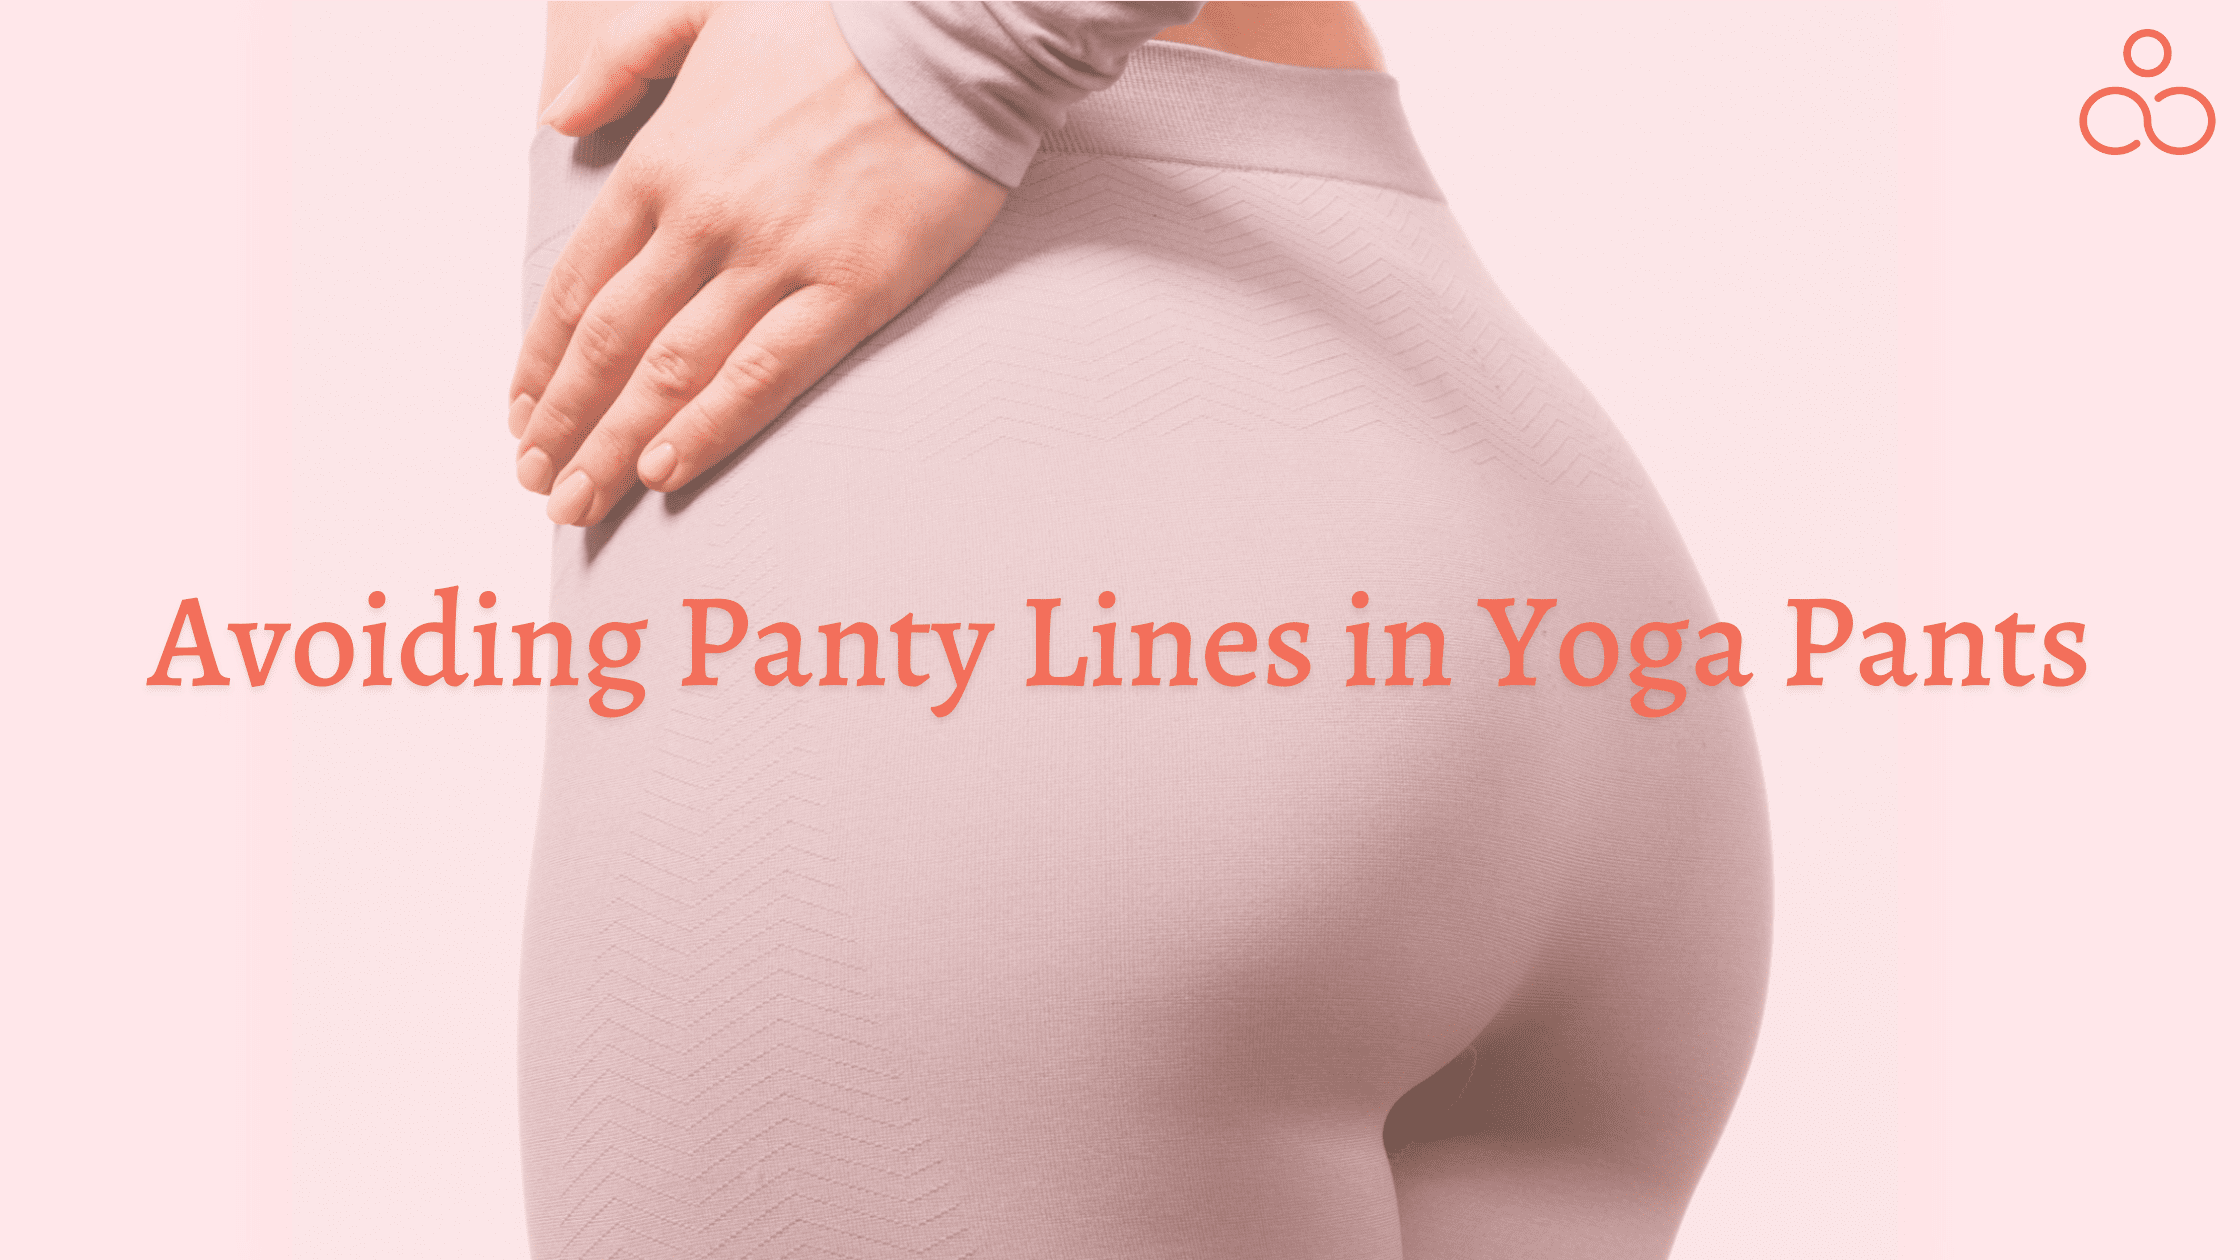 barbara gilles recommends panty lines pic pic